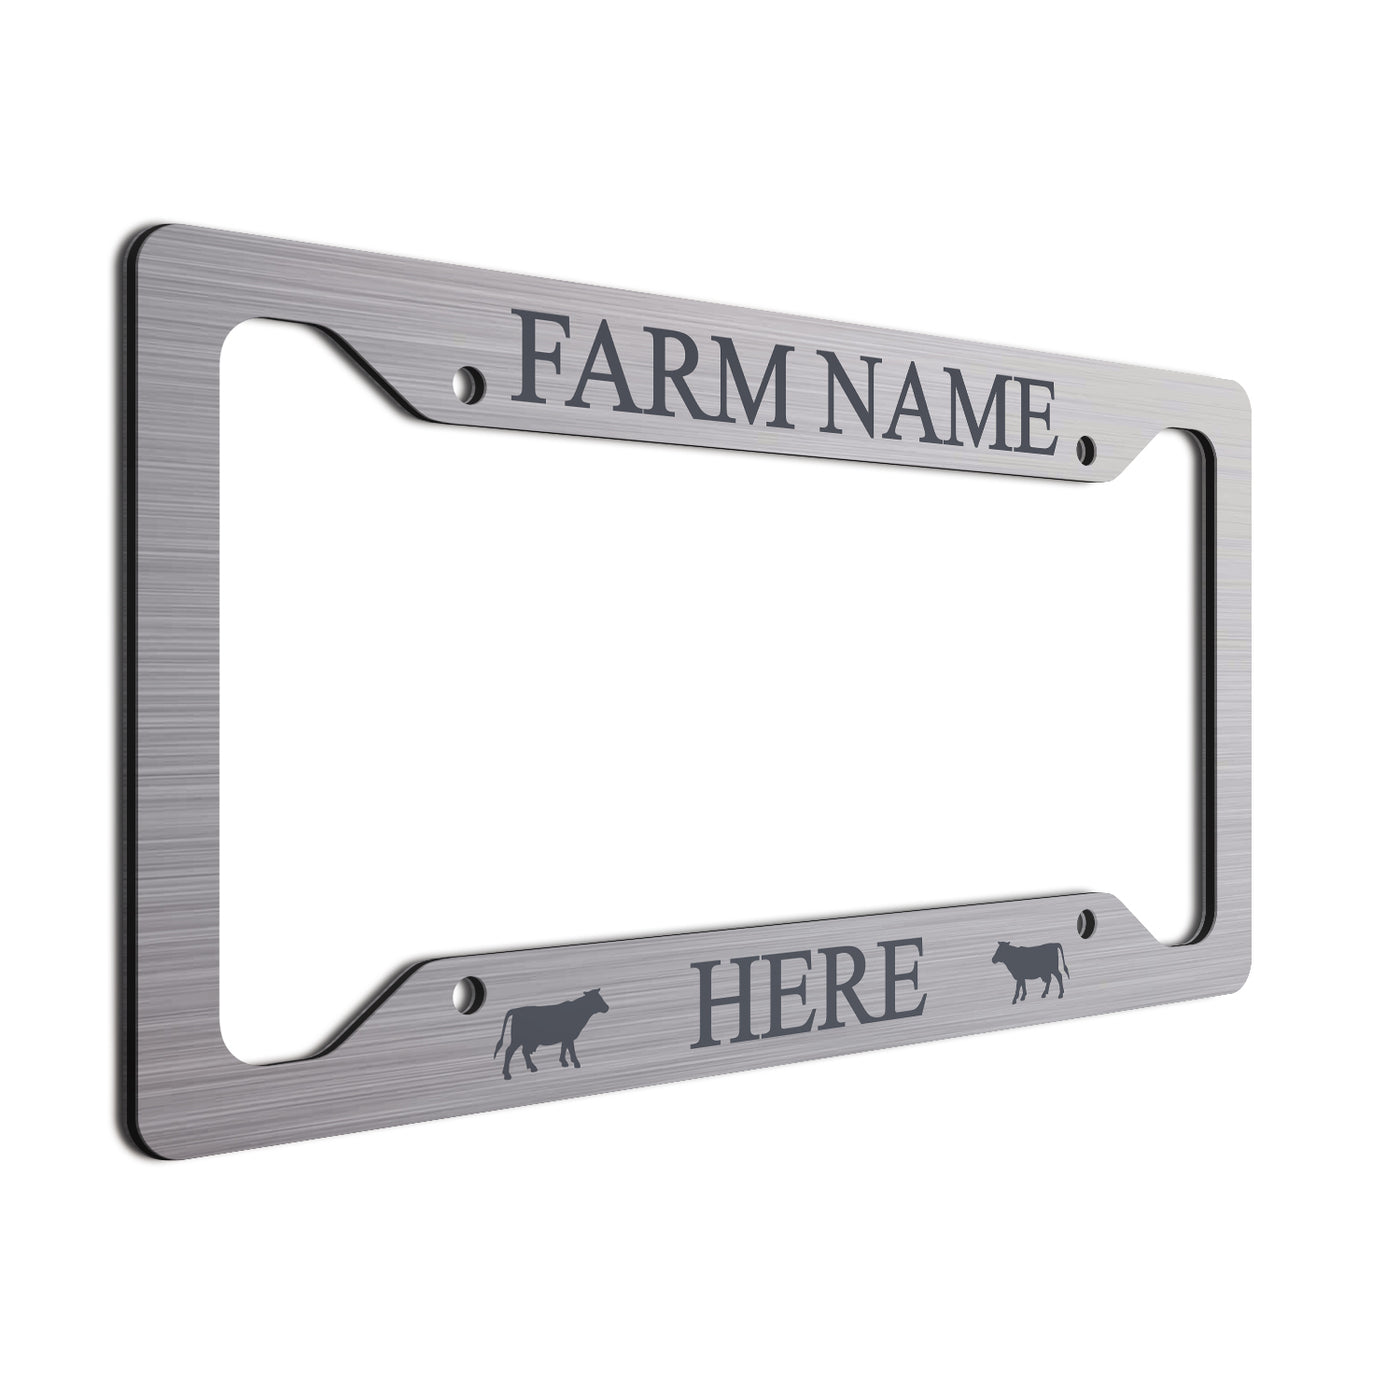 Charcoal Cows and font on brushed finish